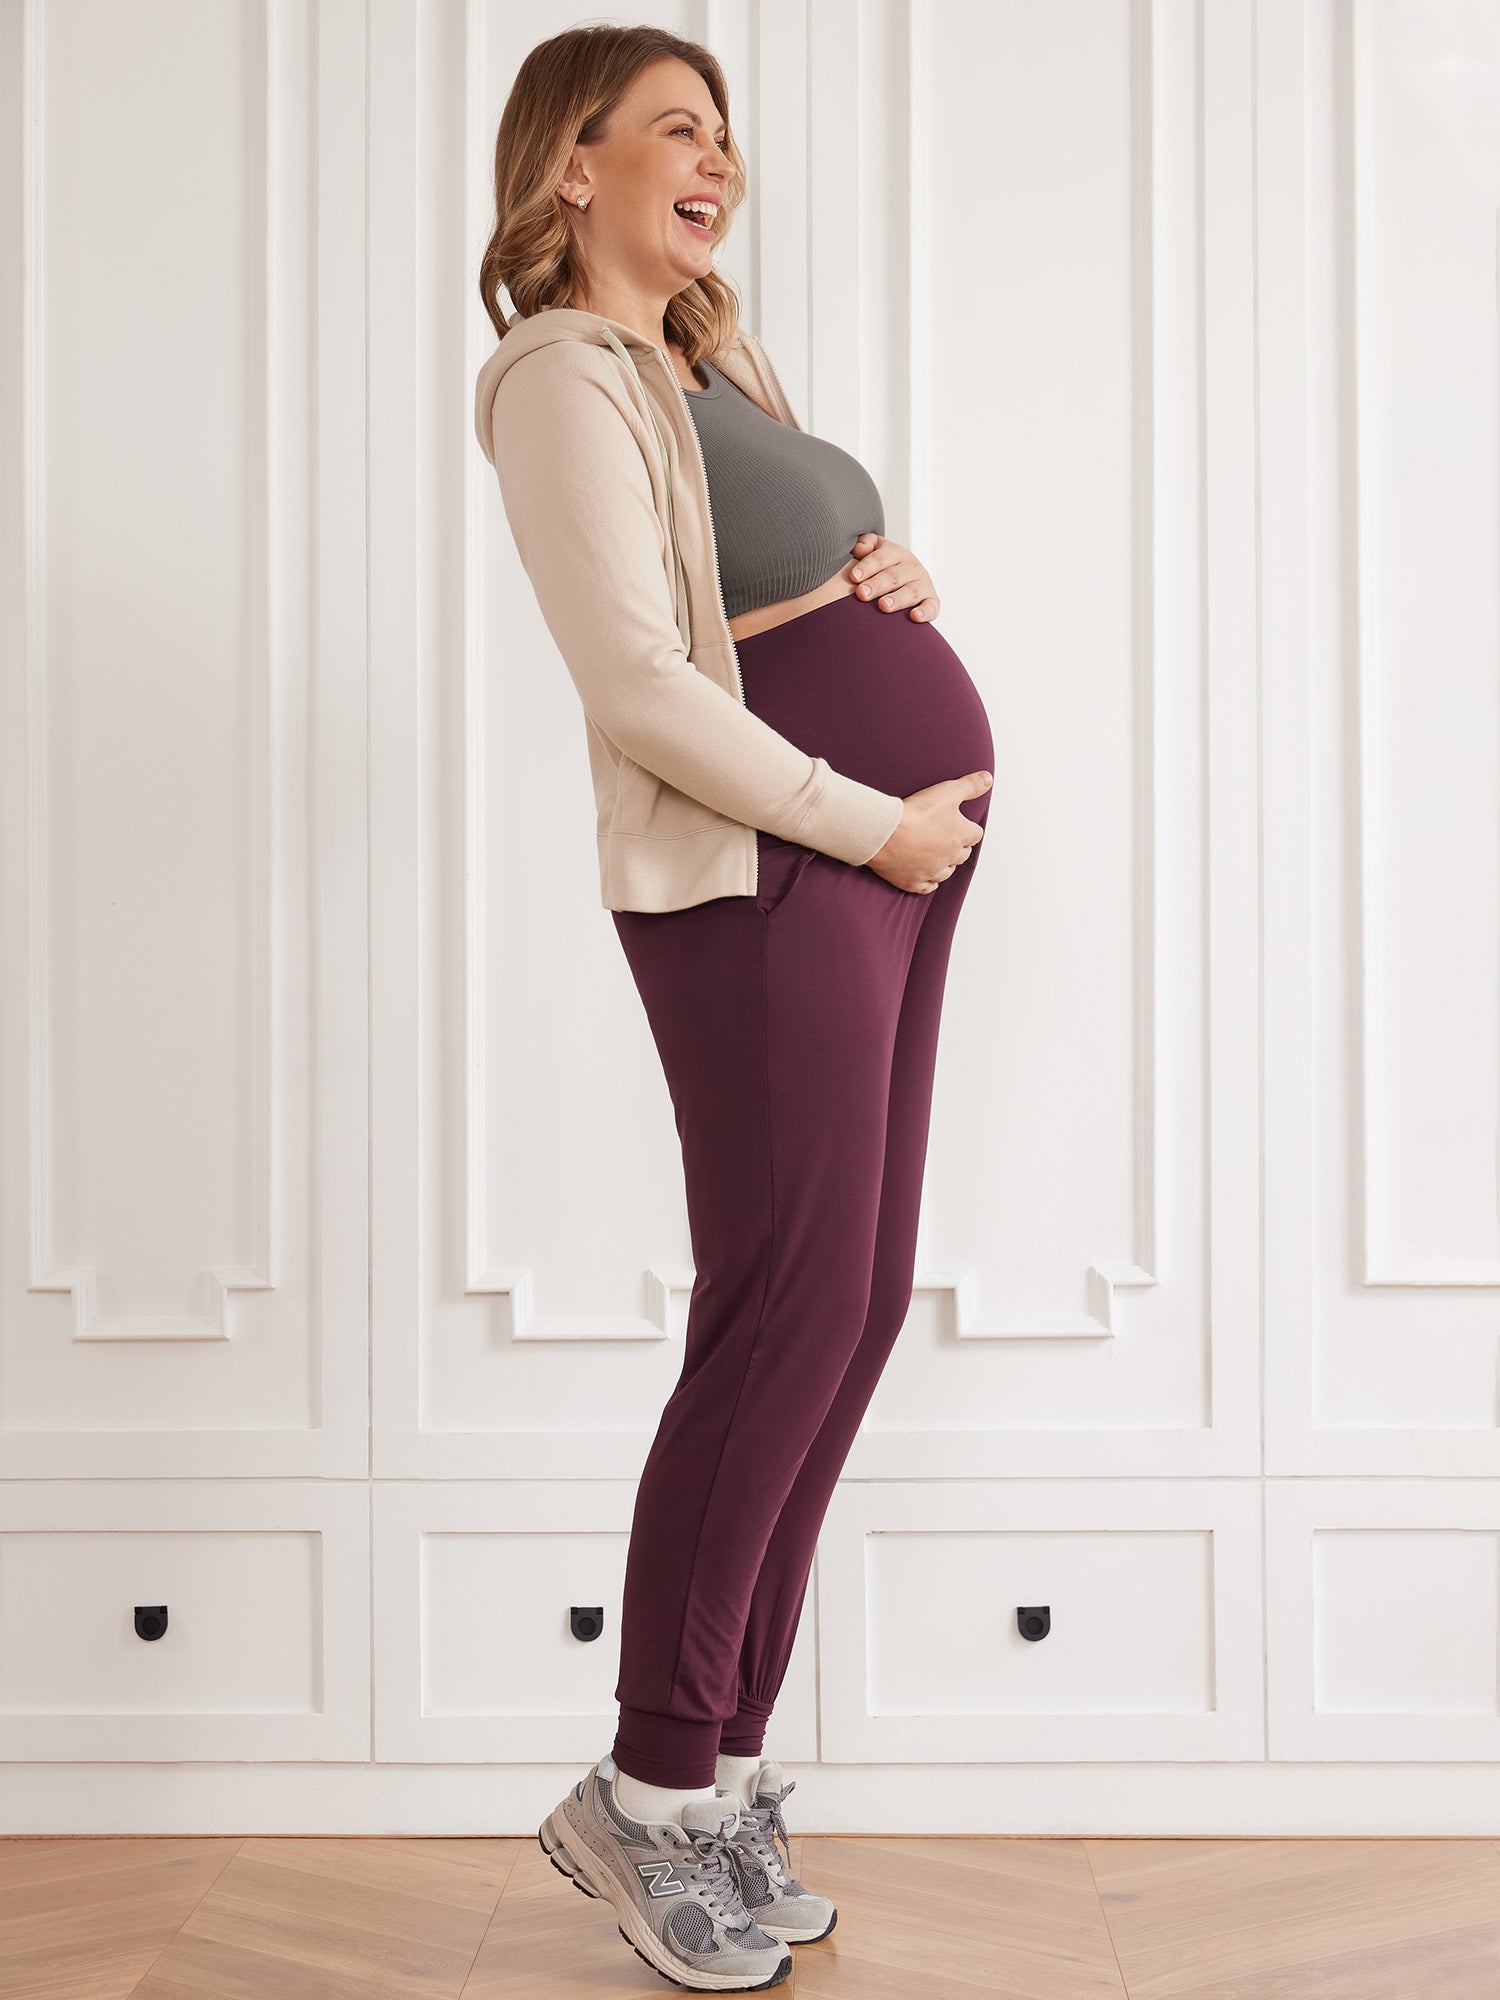 Burgundy Red Maternity Leggings – The Purple Puddle